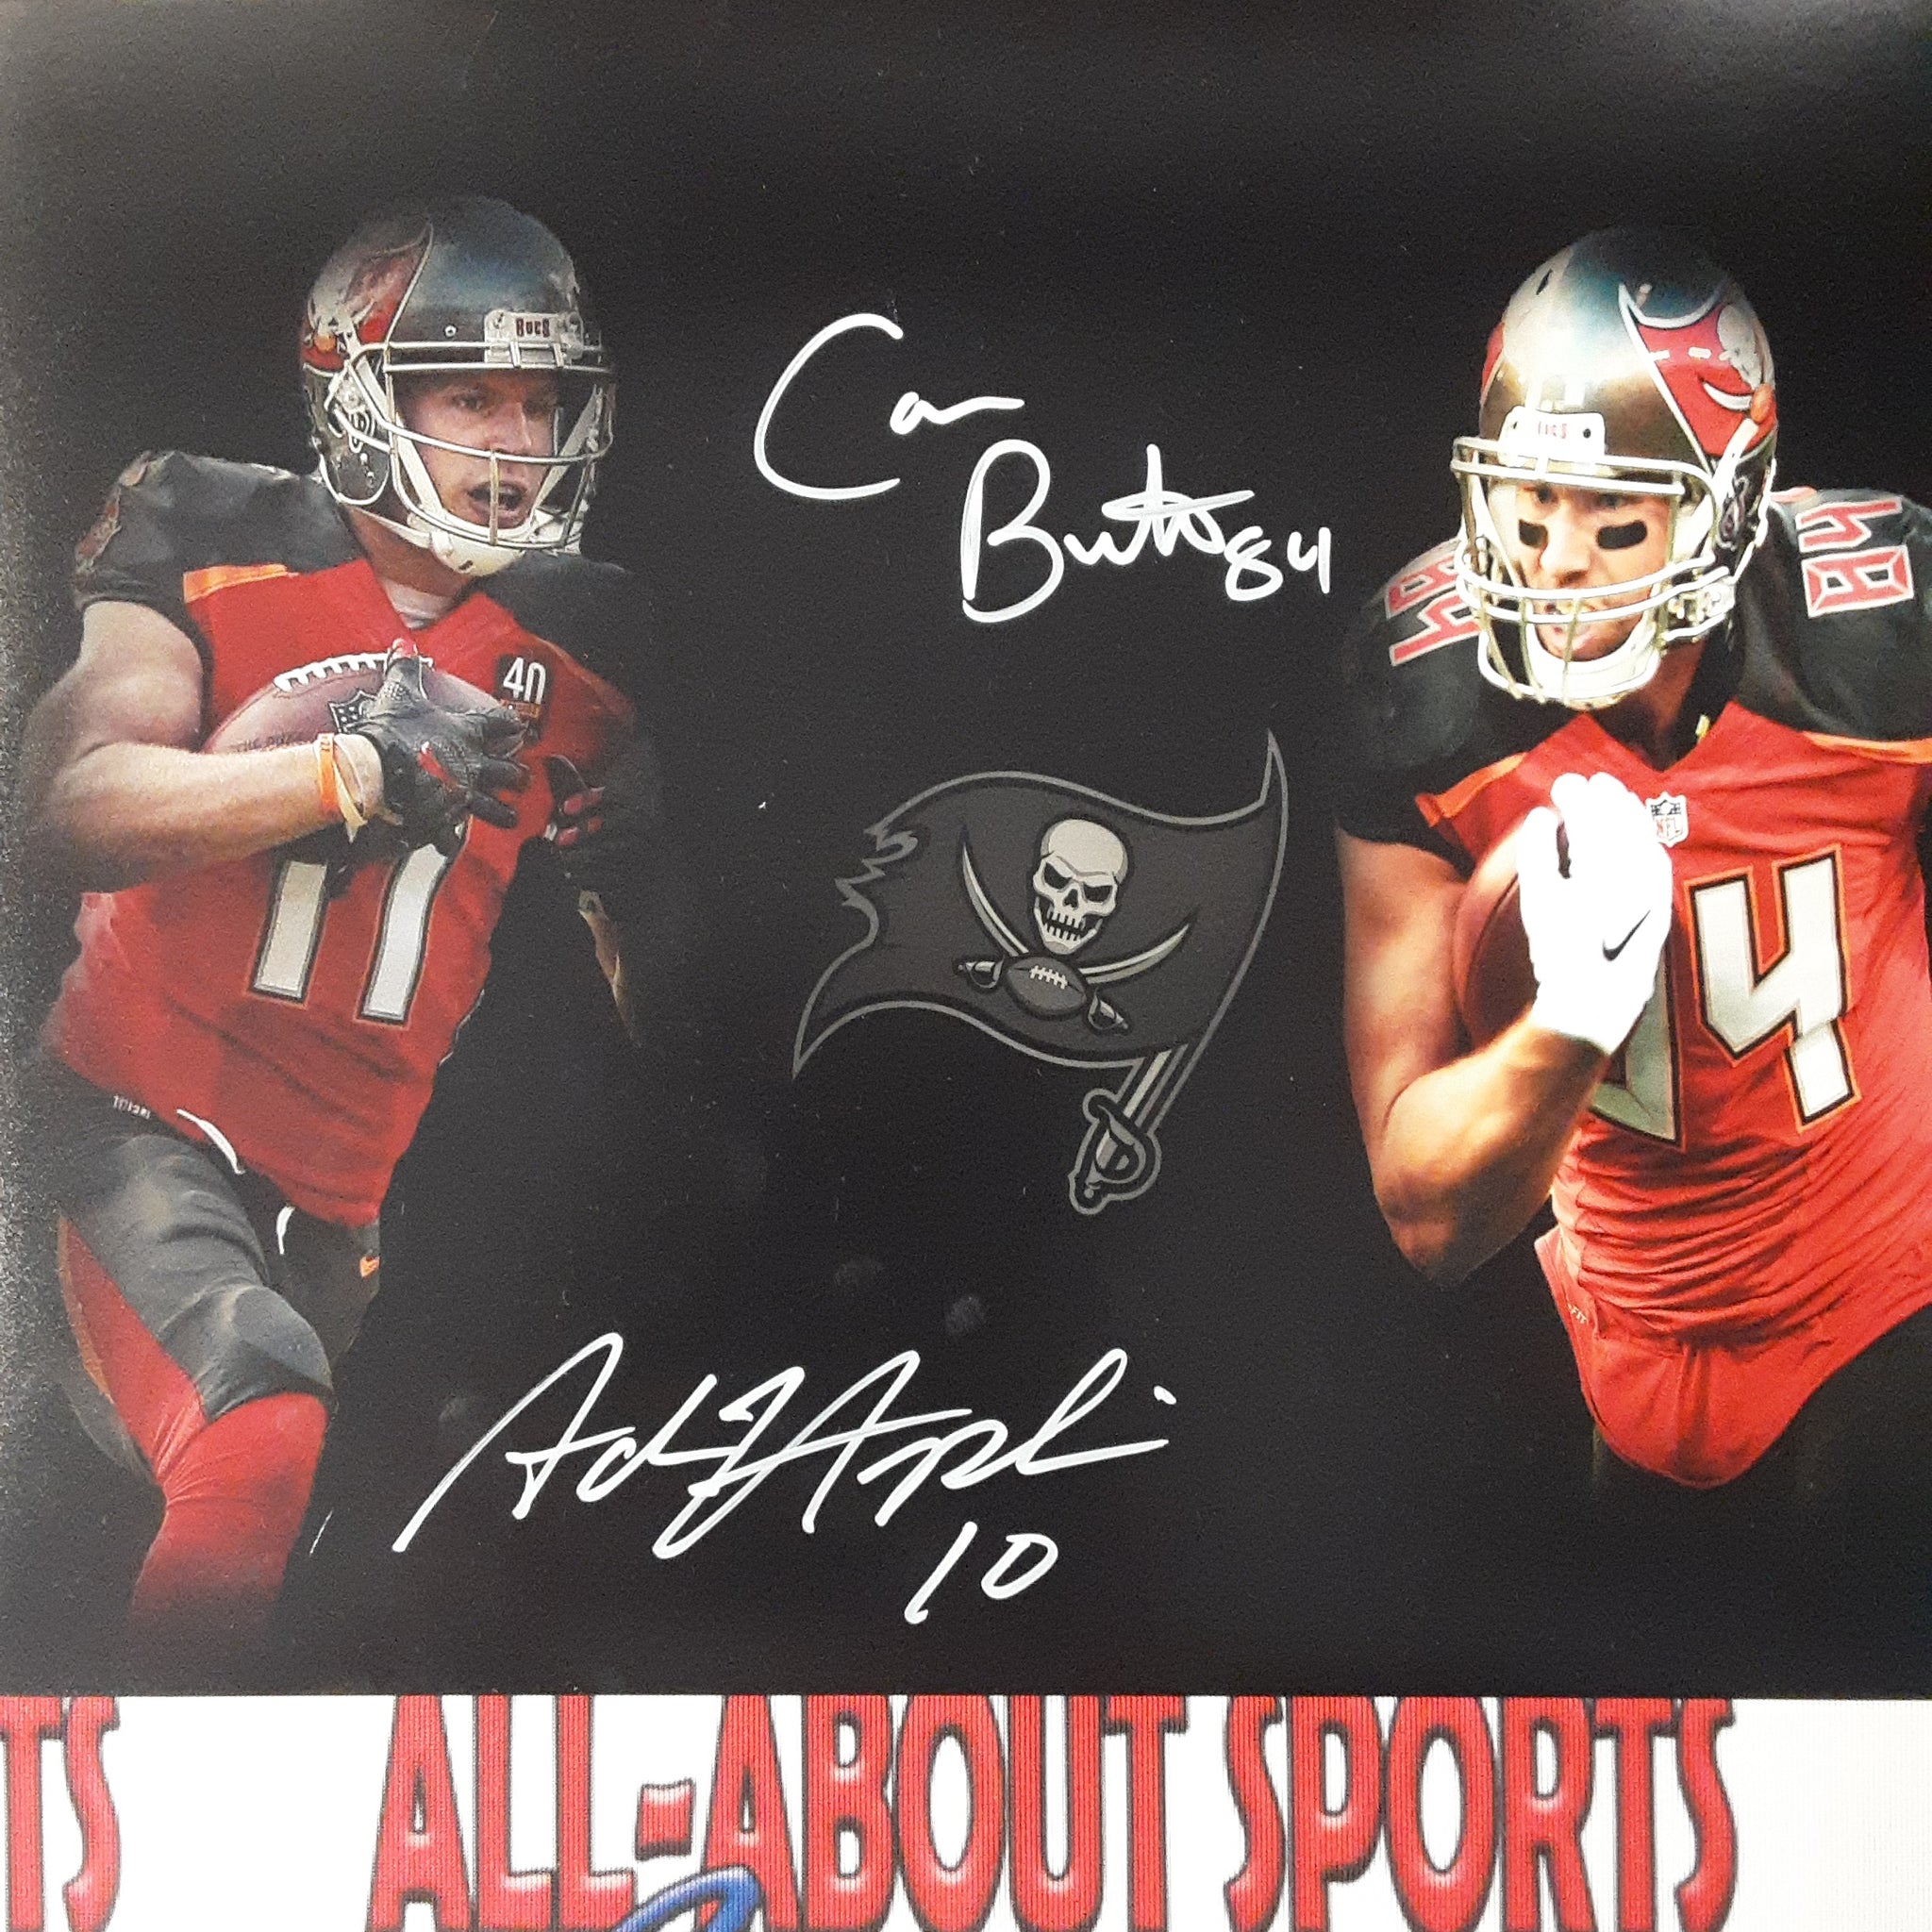 Cameron Brate and Adam Humphries Authentic Signed 11x14 Photo Autographed JSA.